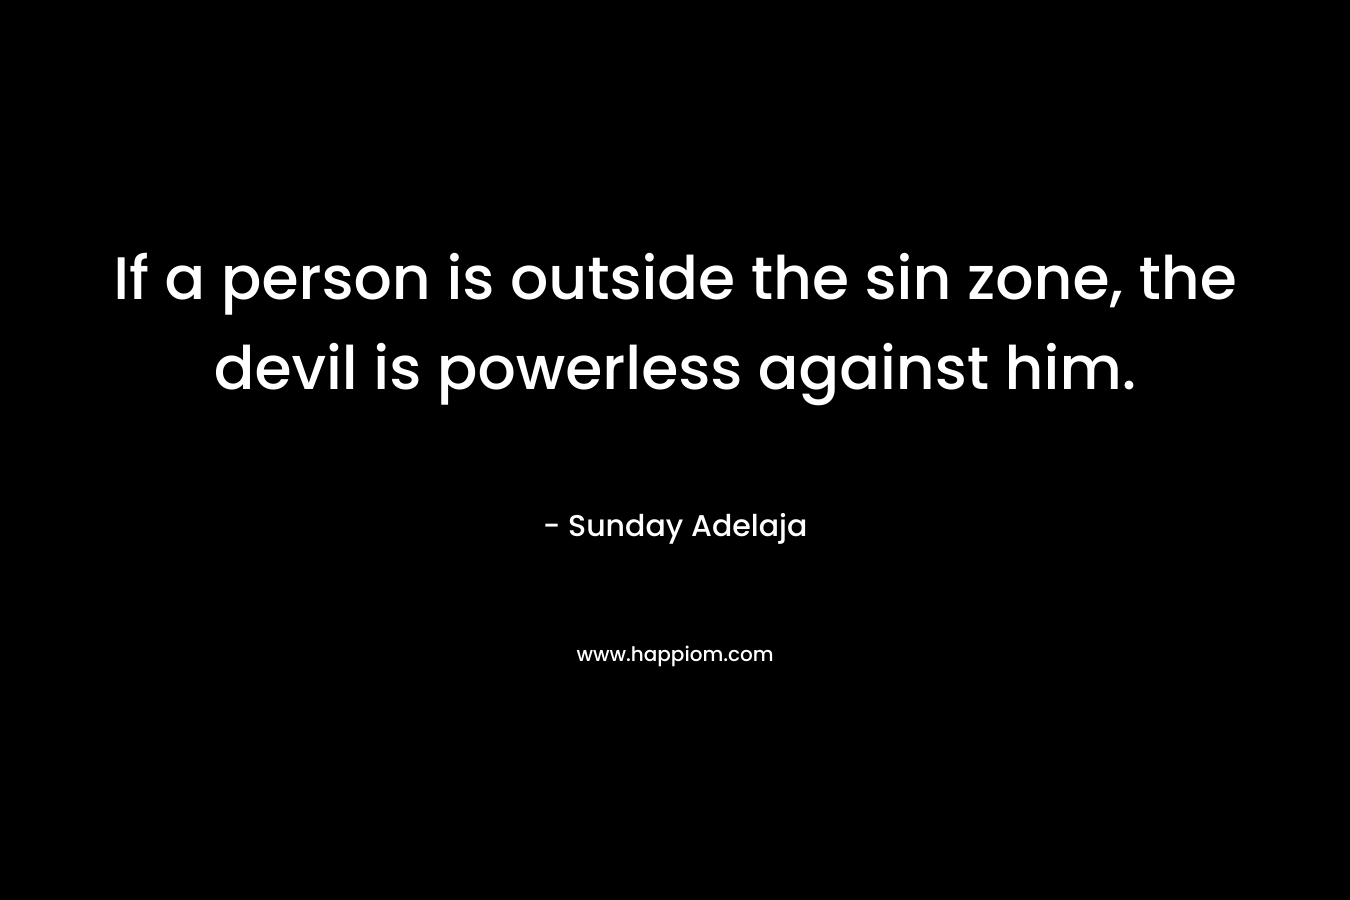 If a person is outside the sin zone, the devil is powerless against him.